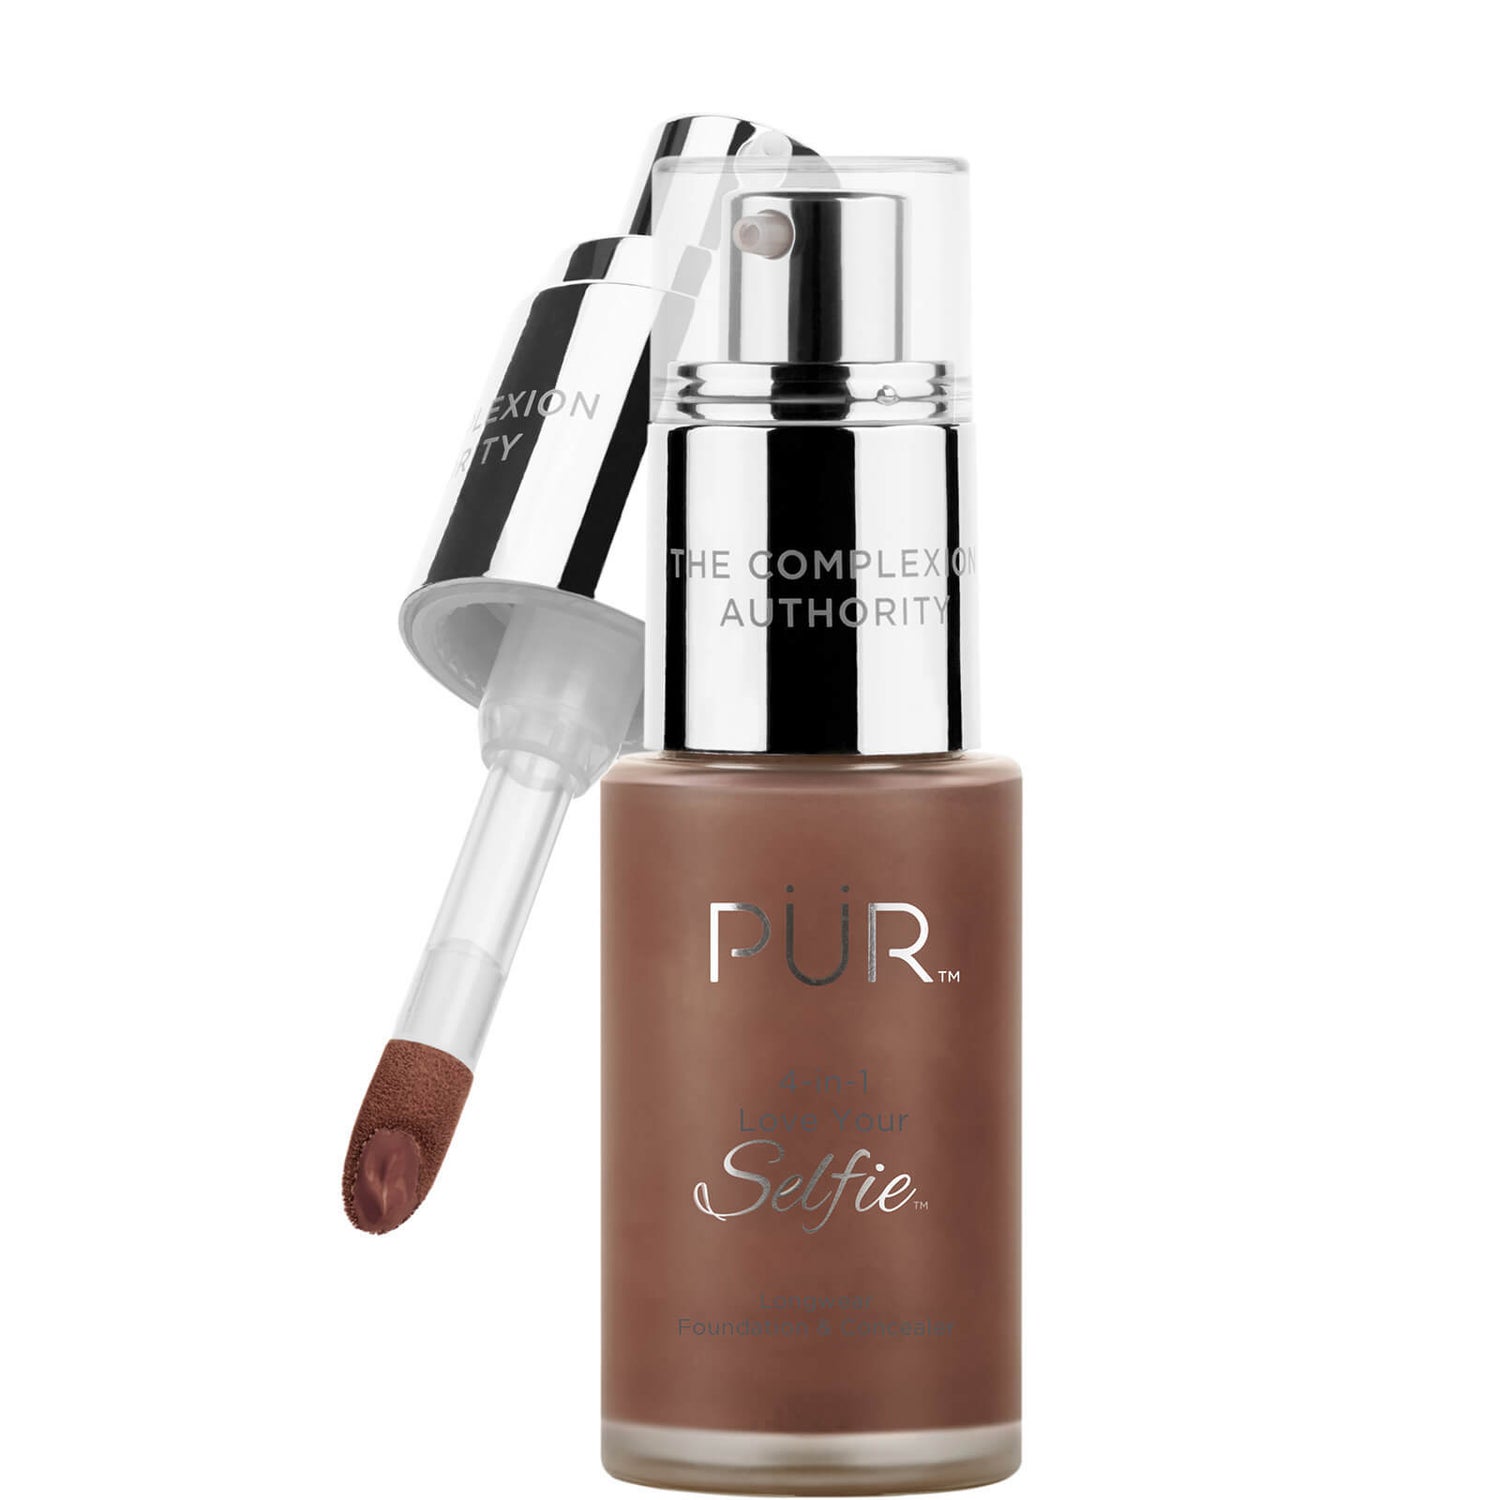 PÜR 4-in-1 Love Your Selfie Longwear Foundation and Concealer 30ml (Various Shades)